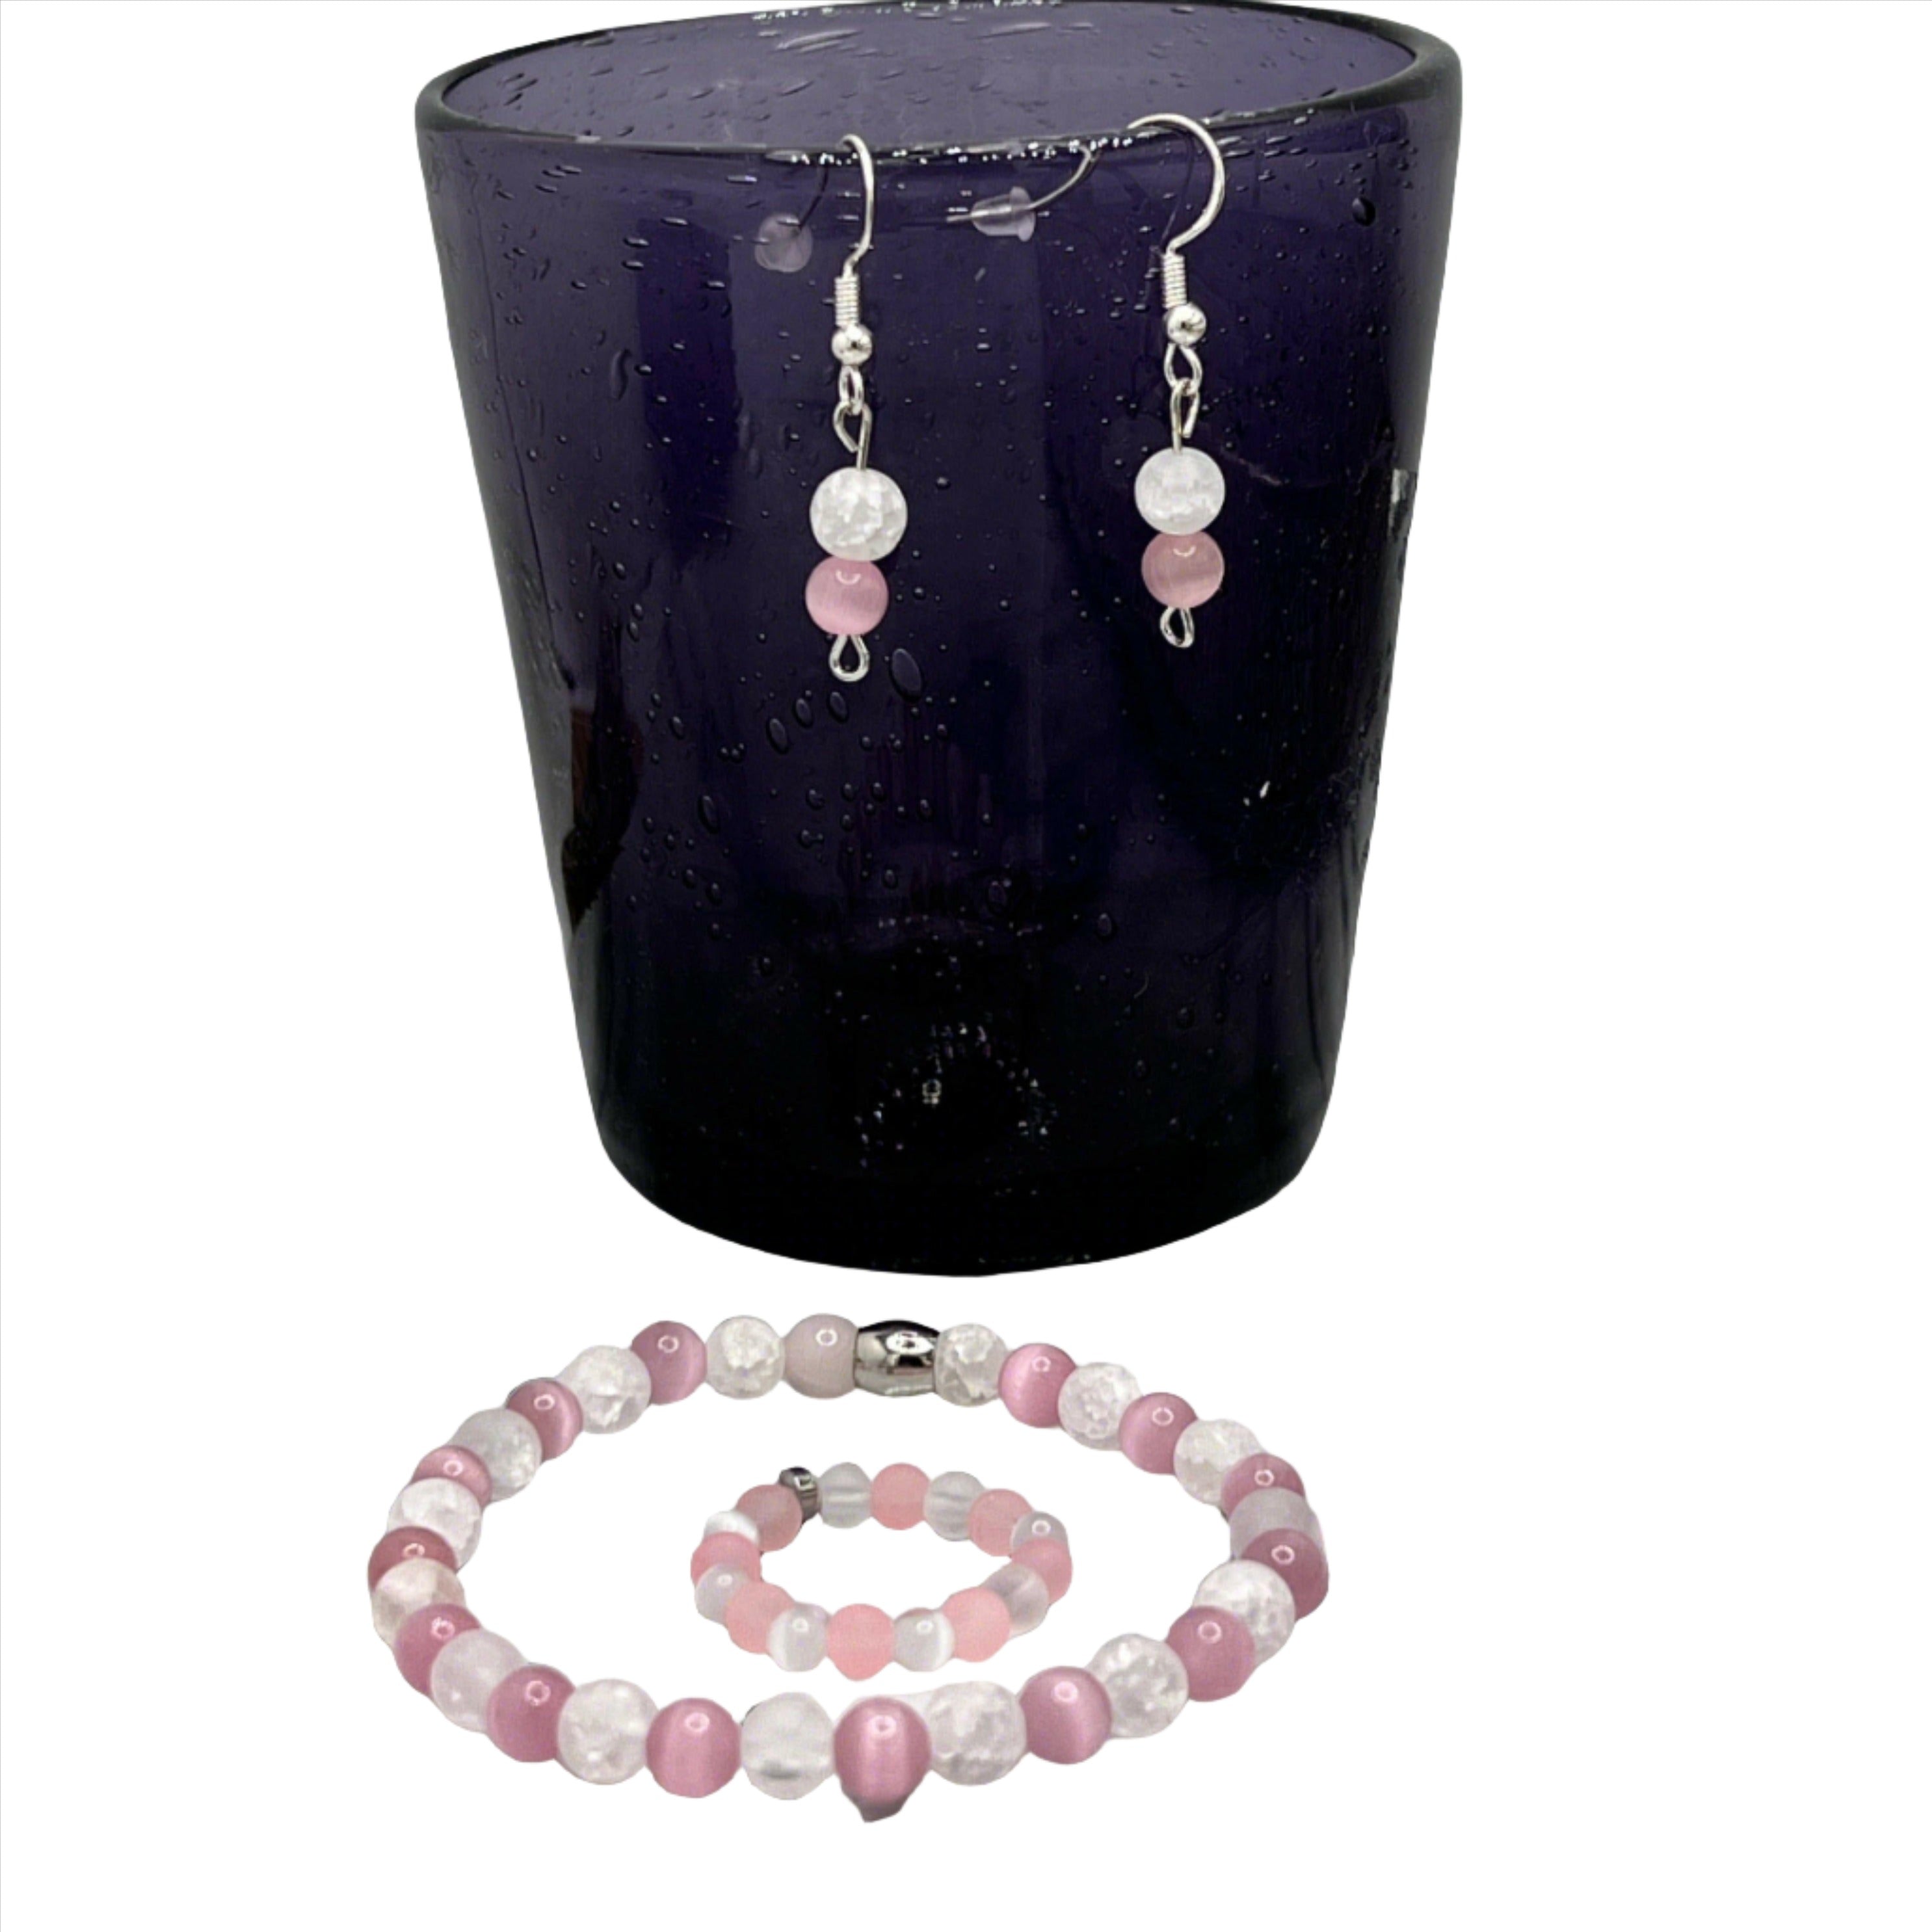 Bec Sue Jewelry Shop Jewelry Set 6.5 / pink and clear / pink cats eye and crackle rock Handcrafted Pink Cat's Eye & Crackle Rock Crystal Jewelry Set - Bracelet, Ring, and Earrings for Elegant Fashion Tags 684